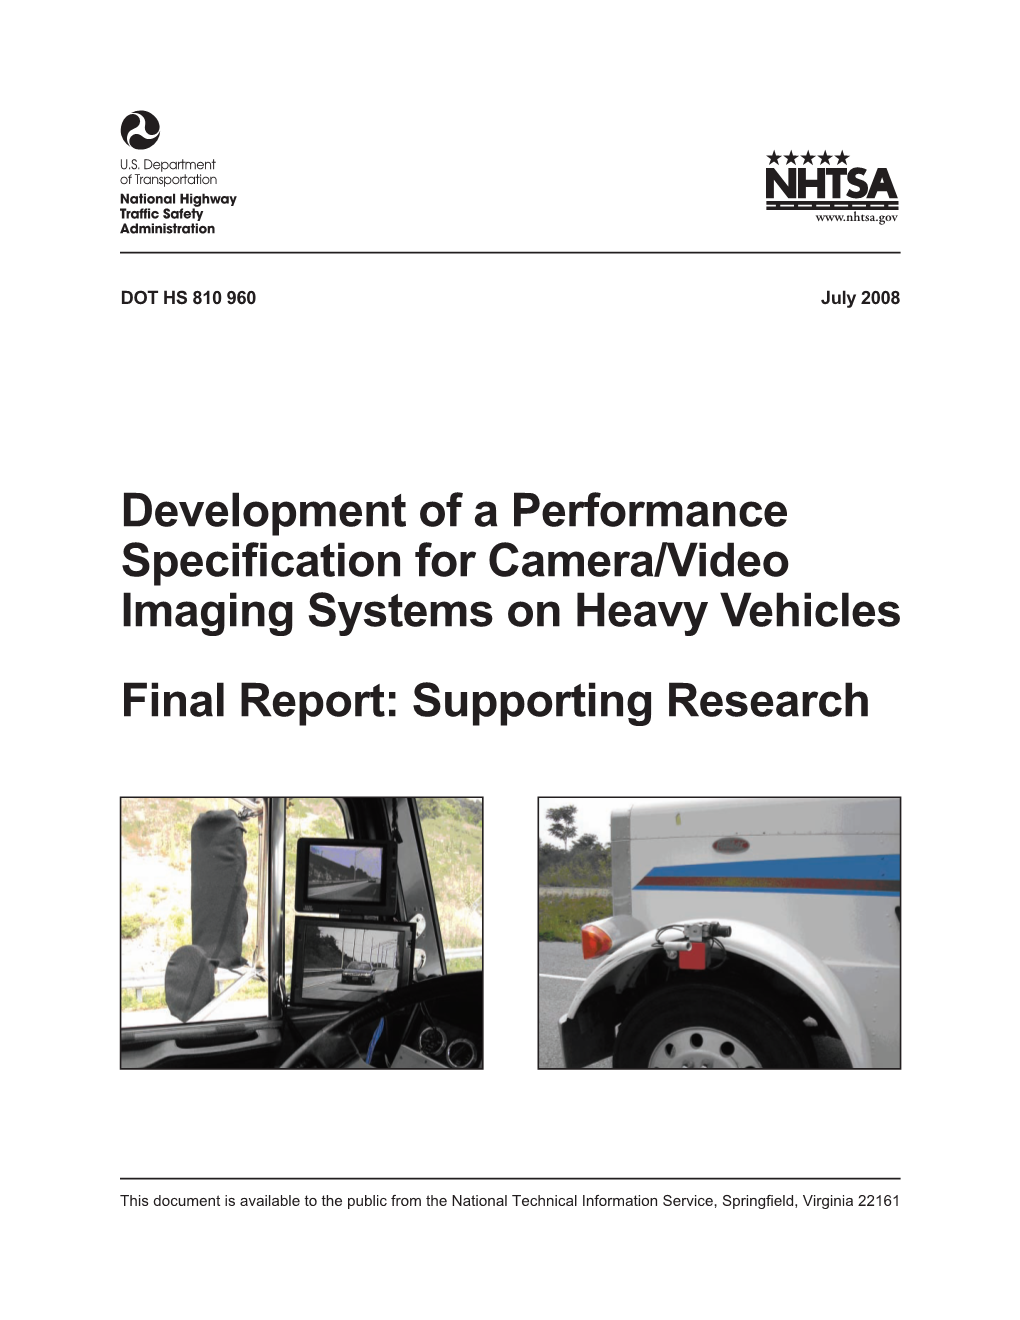 Development of a Performance Specification for Camera/Video Imaging Systems on Heavy Vehicles Final Report: Supporting Research